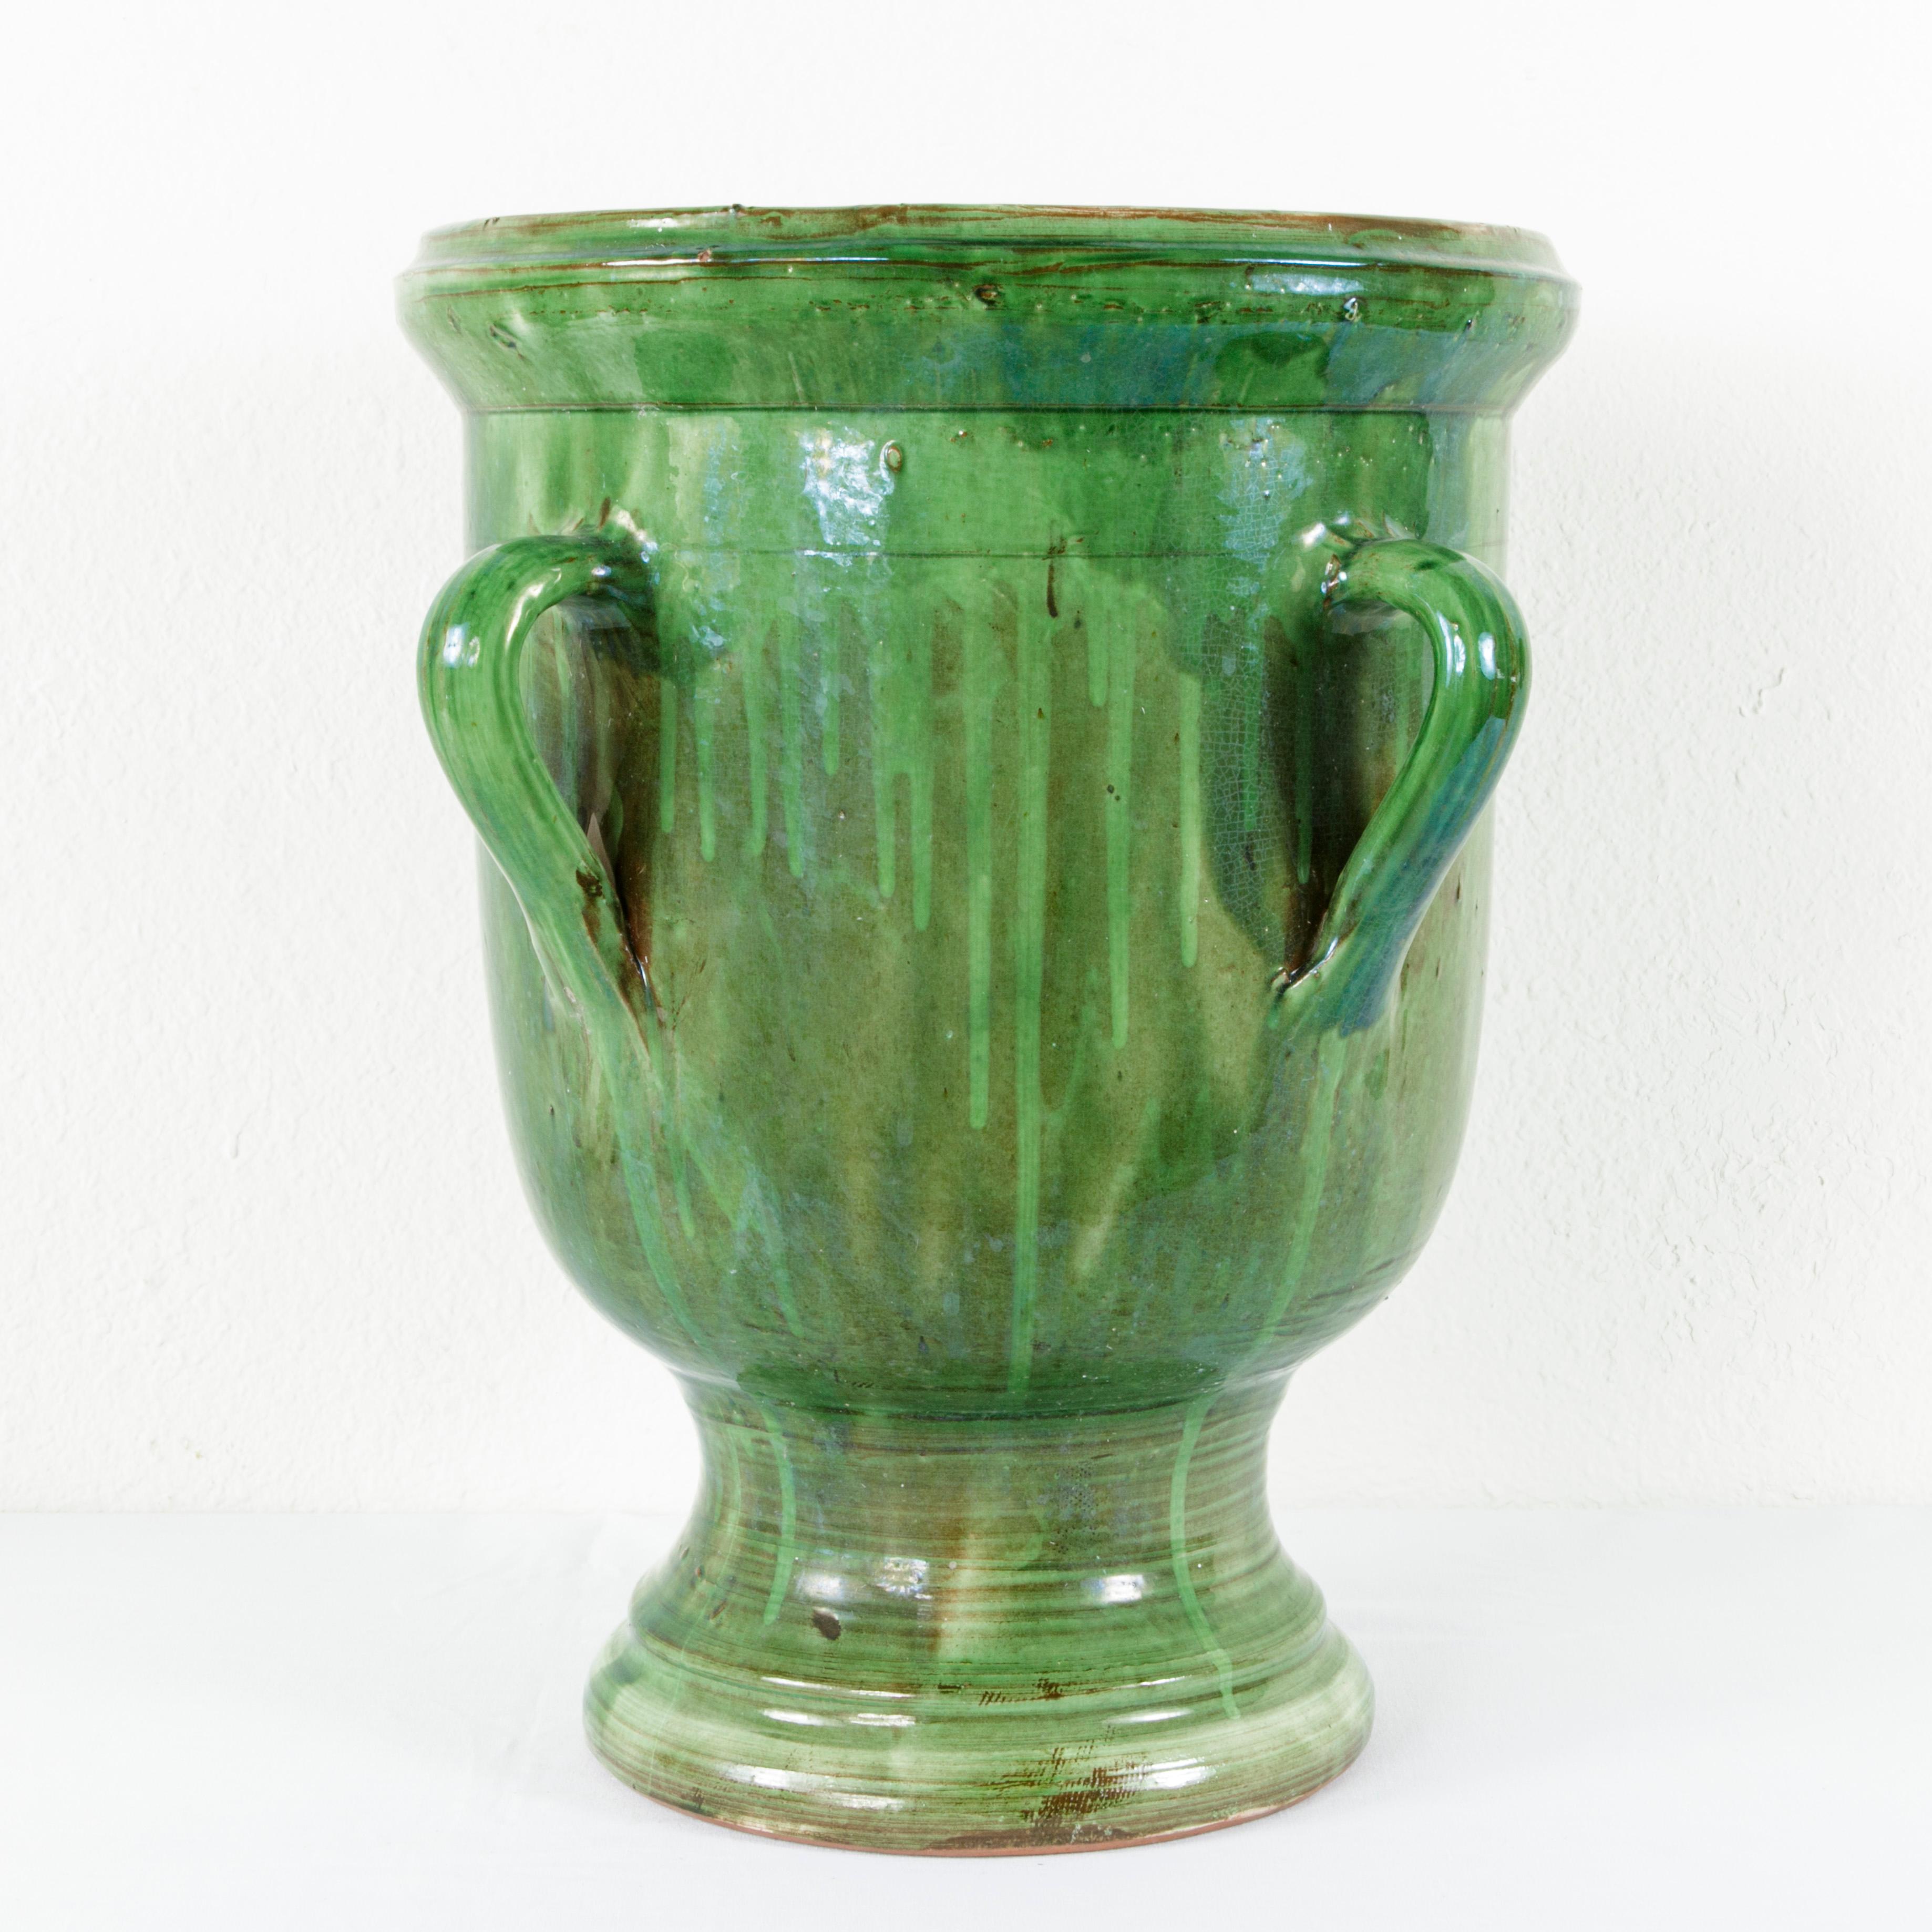 Large Early 20th Century French Green Faience Urn with Handles from Provence 1